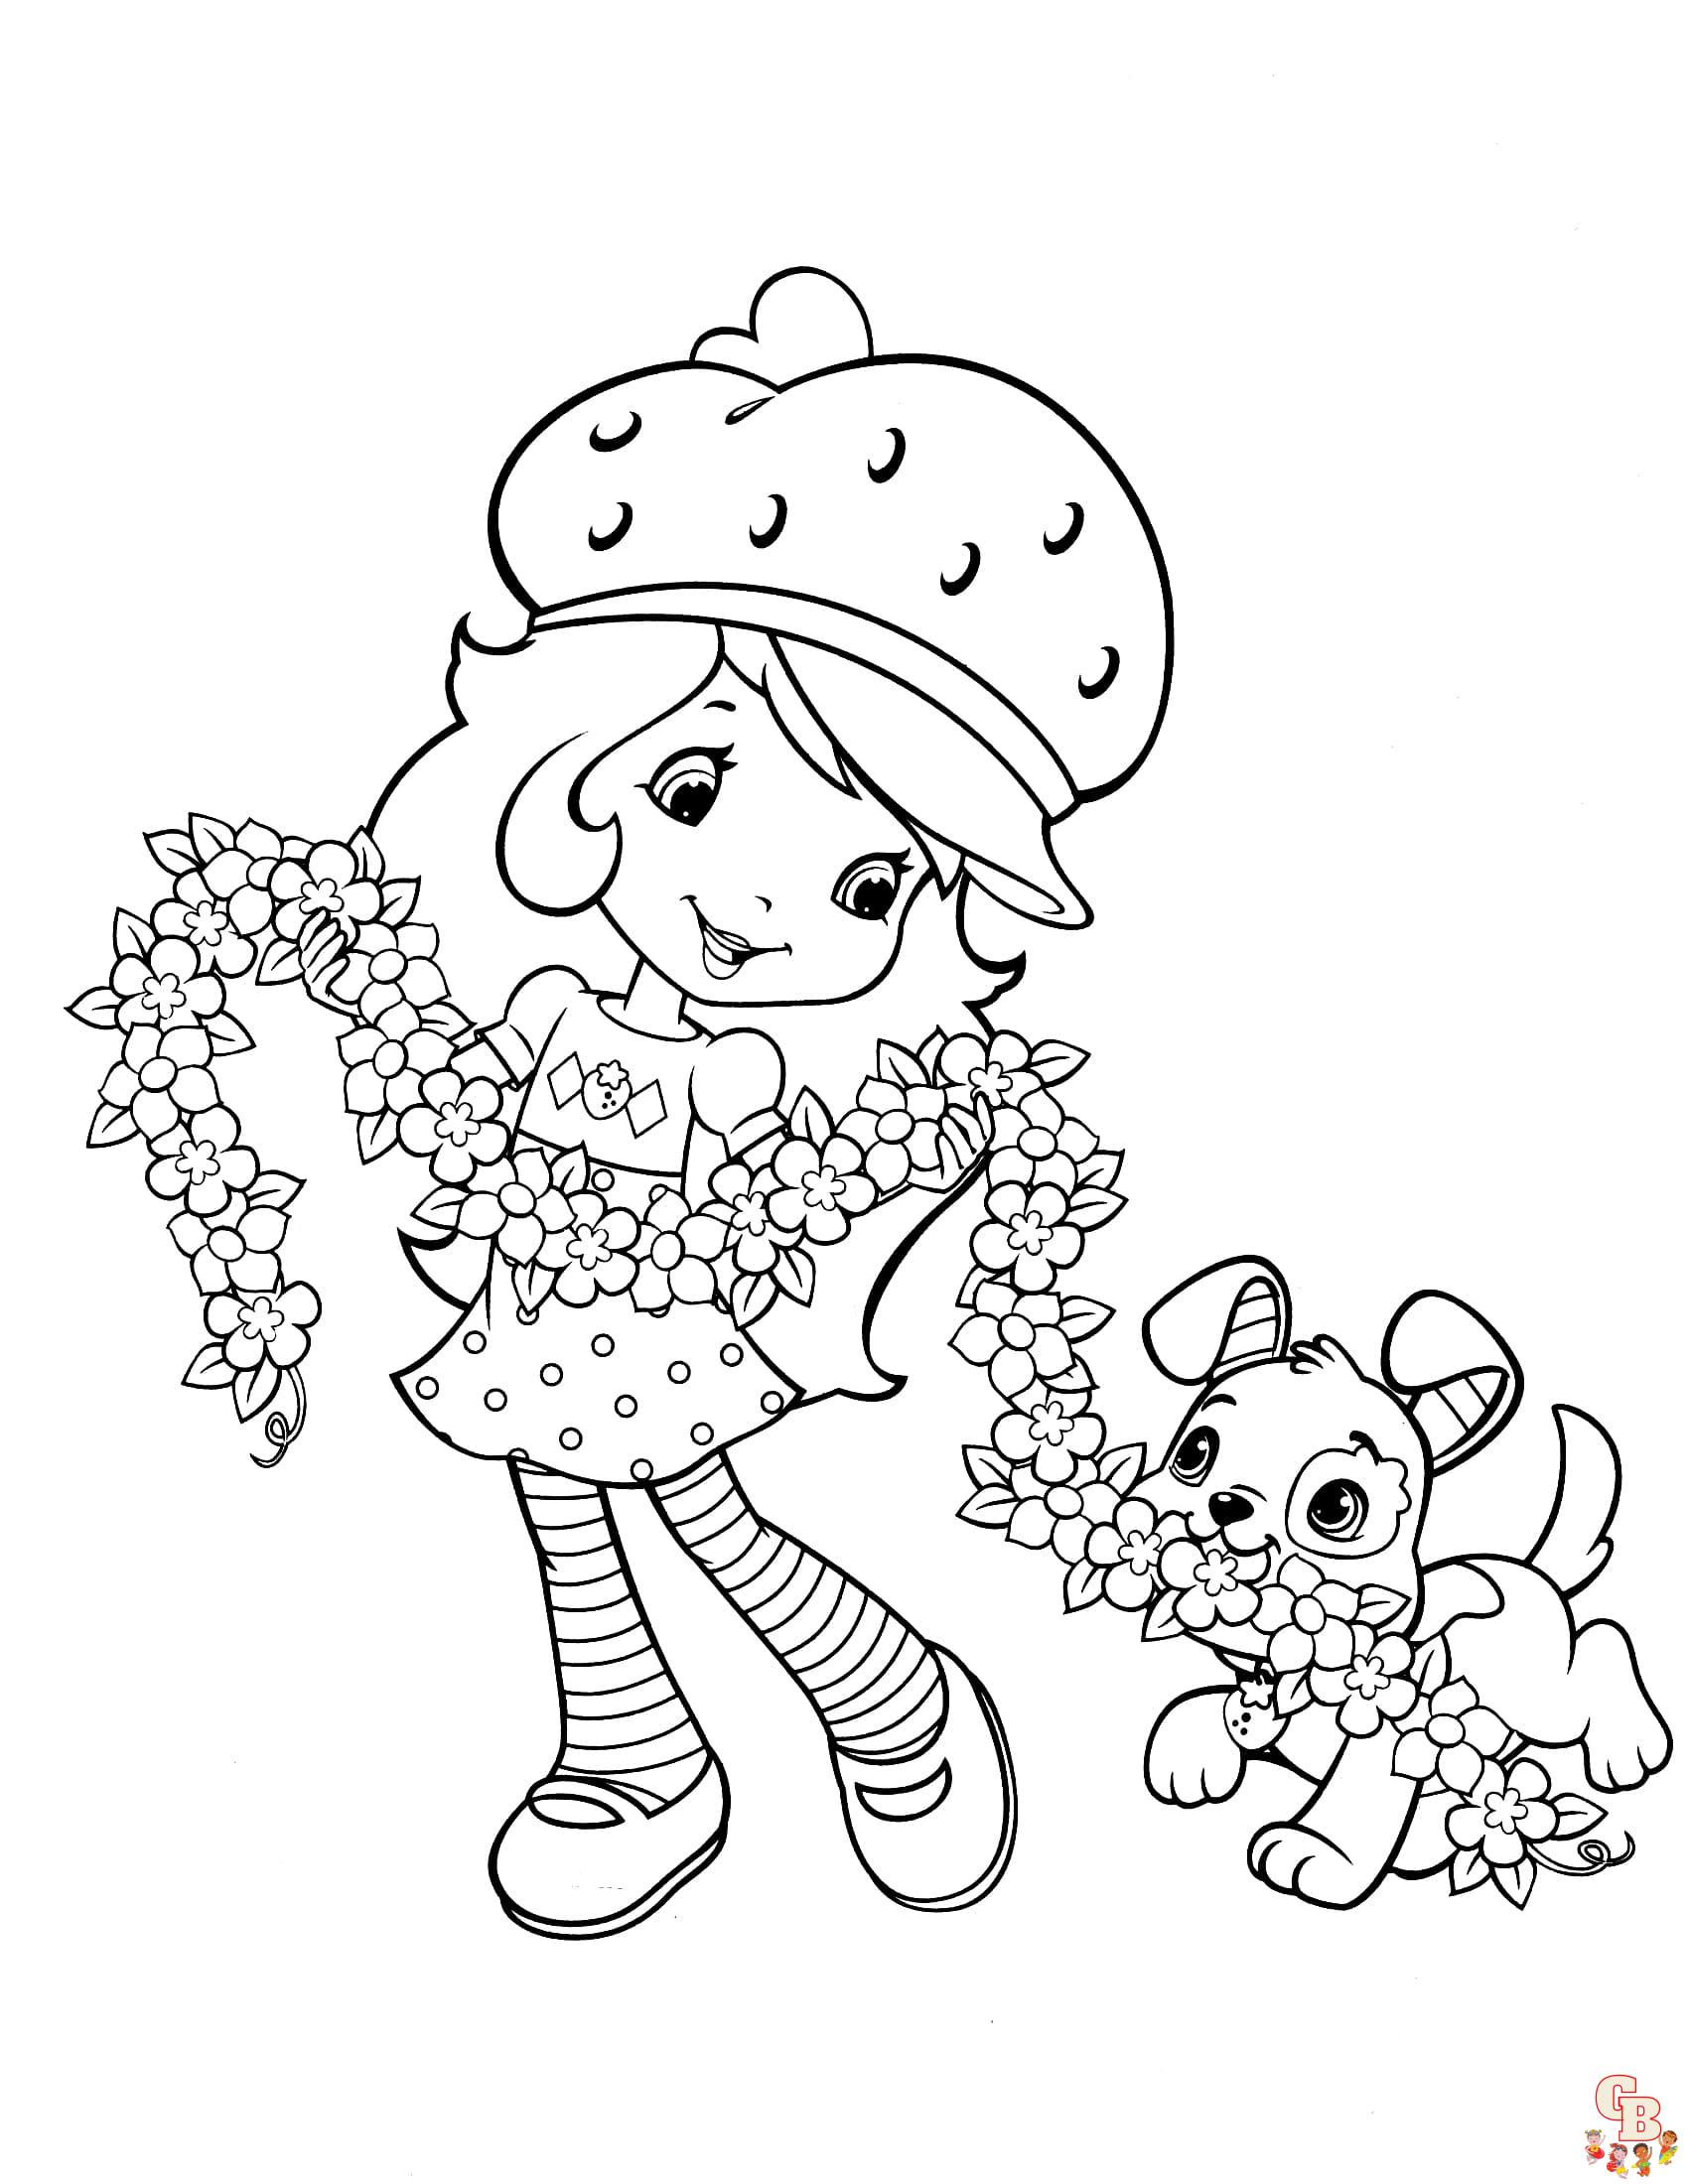 Strawberry Shortcake Coloring Book: Strawberry Shortcake Coloring Pages For  Everyone To Color, Have Fun With Many Premium Quality Images by Chase  Jackson